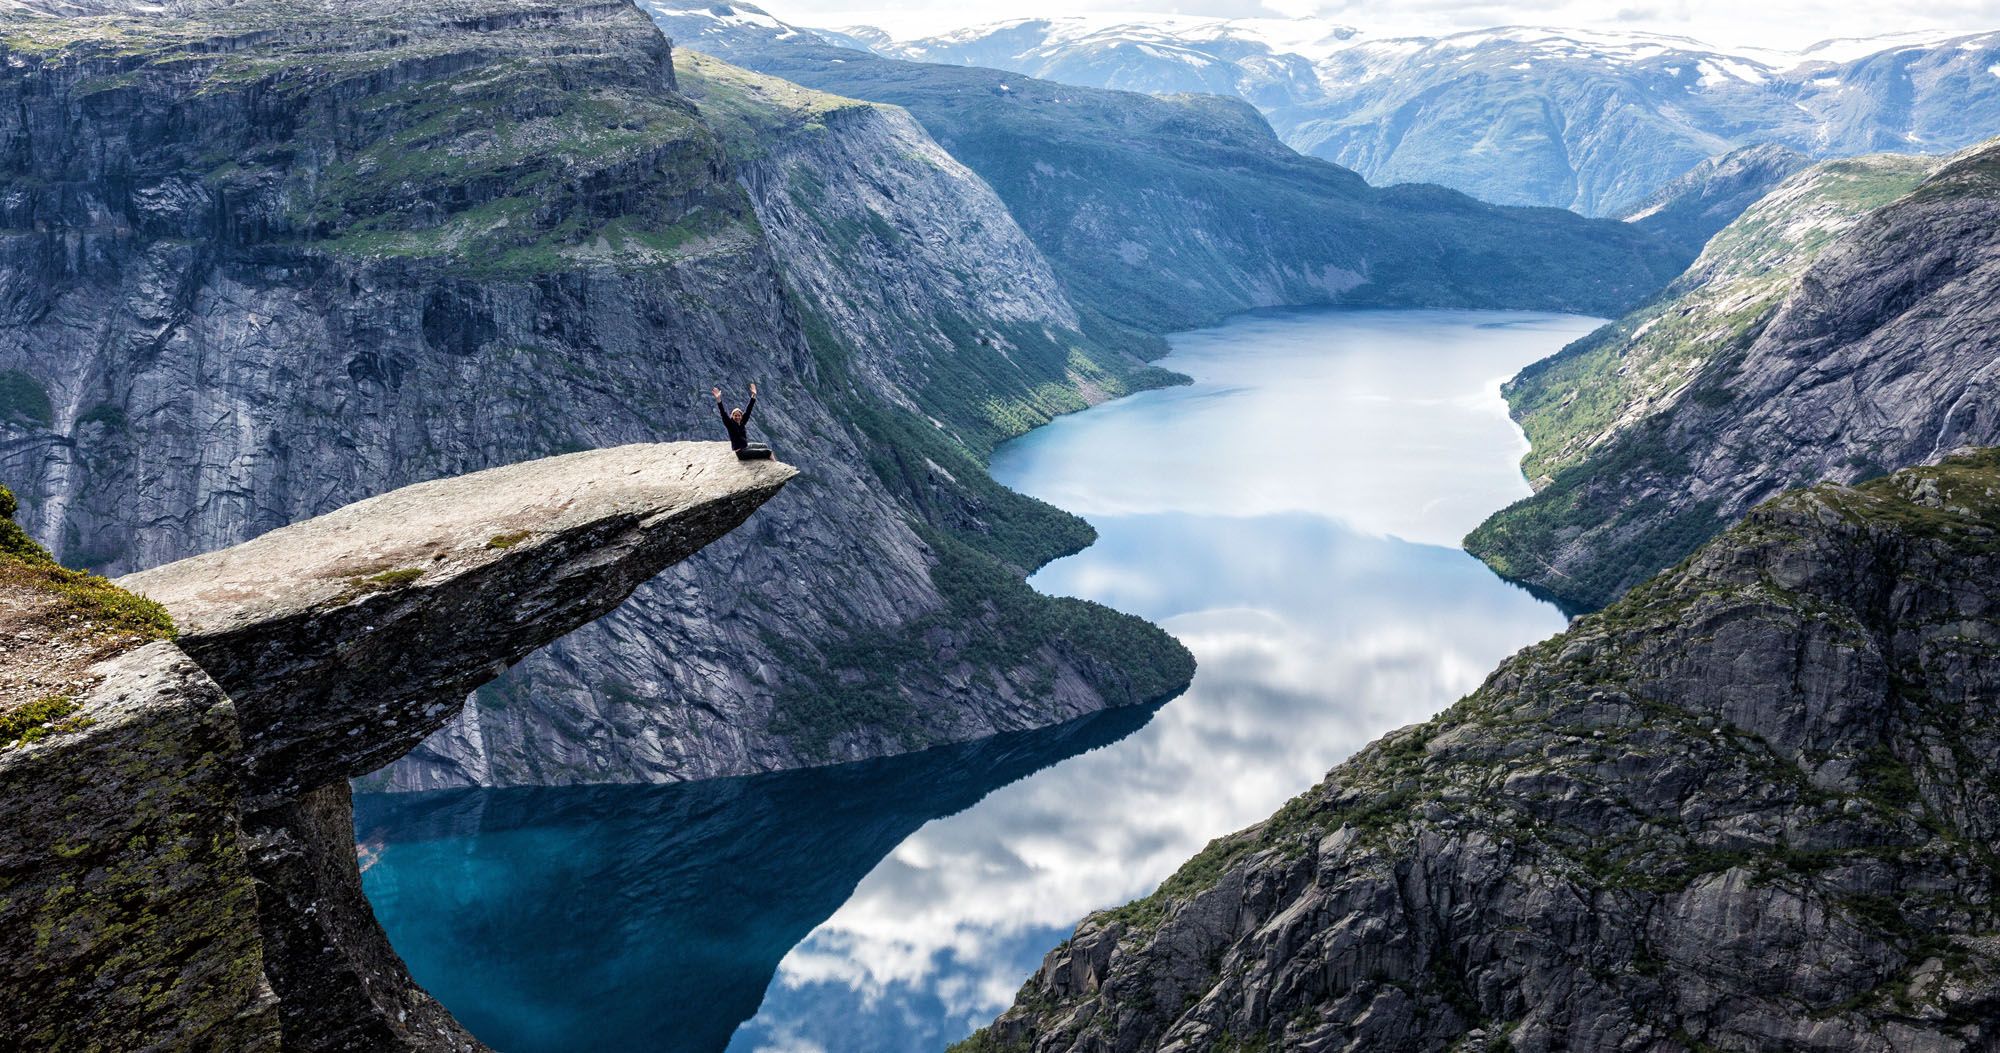 Featured image for “Hiking Trolltunga: Hiking Stats, Parking, Photos & Hiking with Kids”